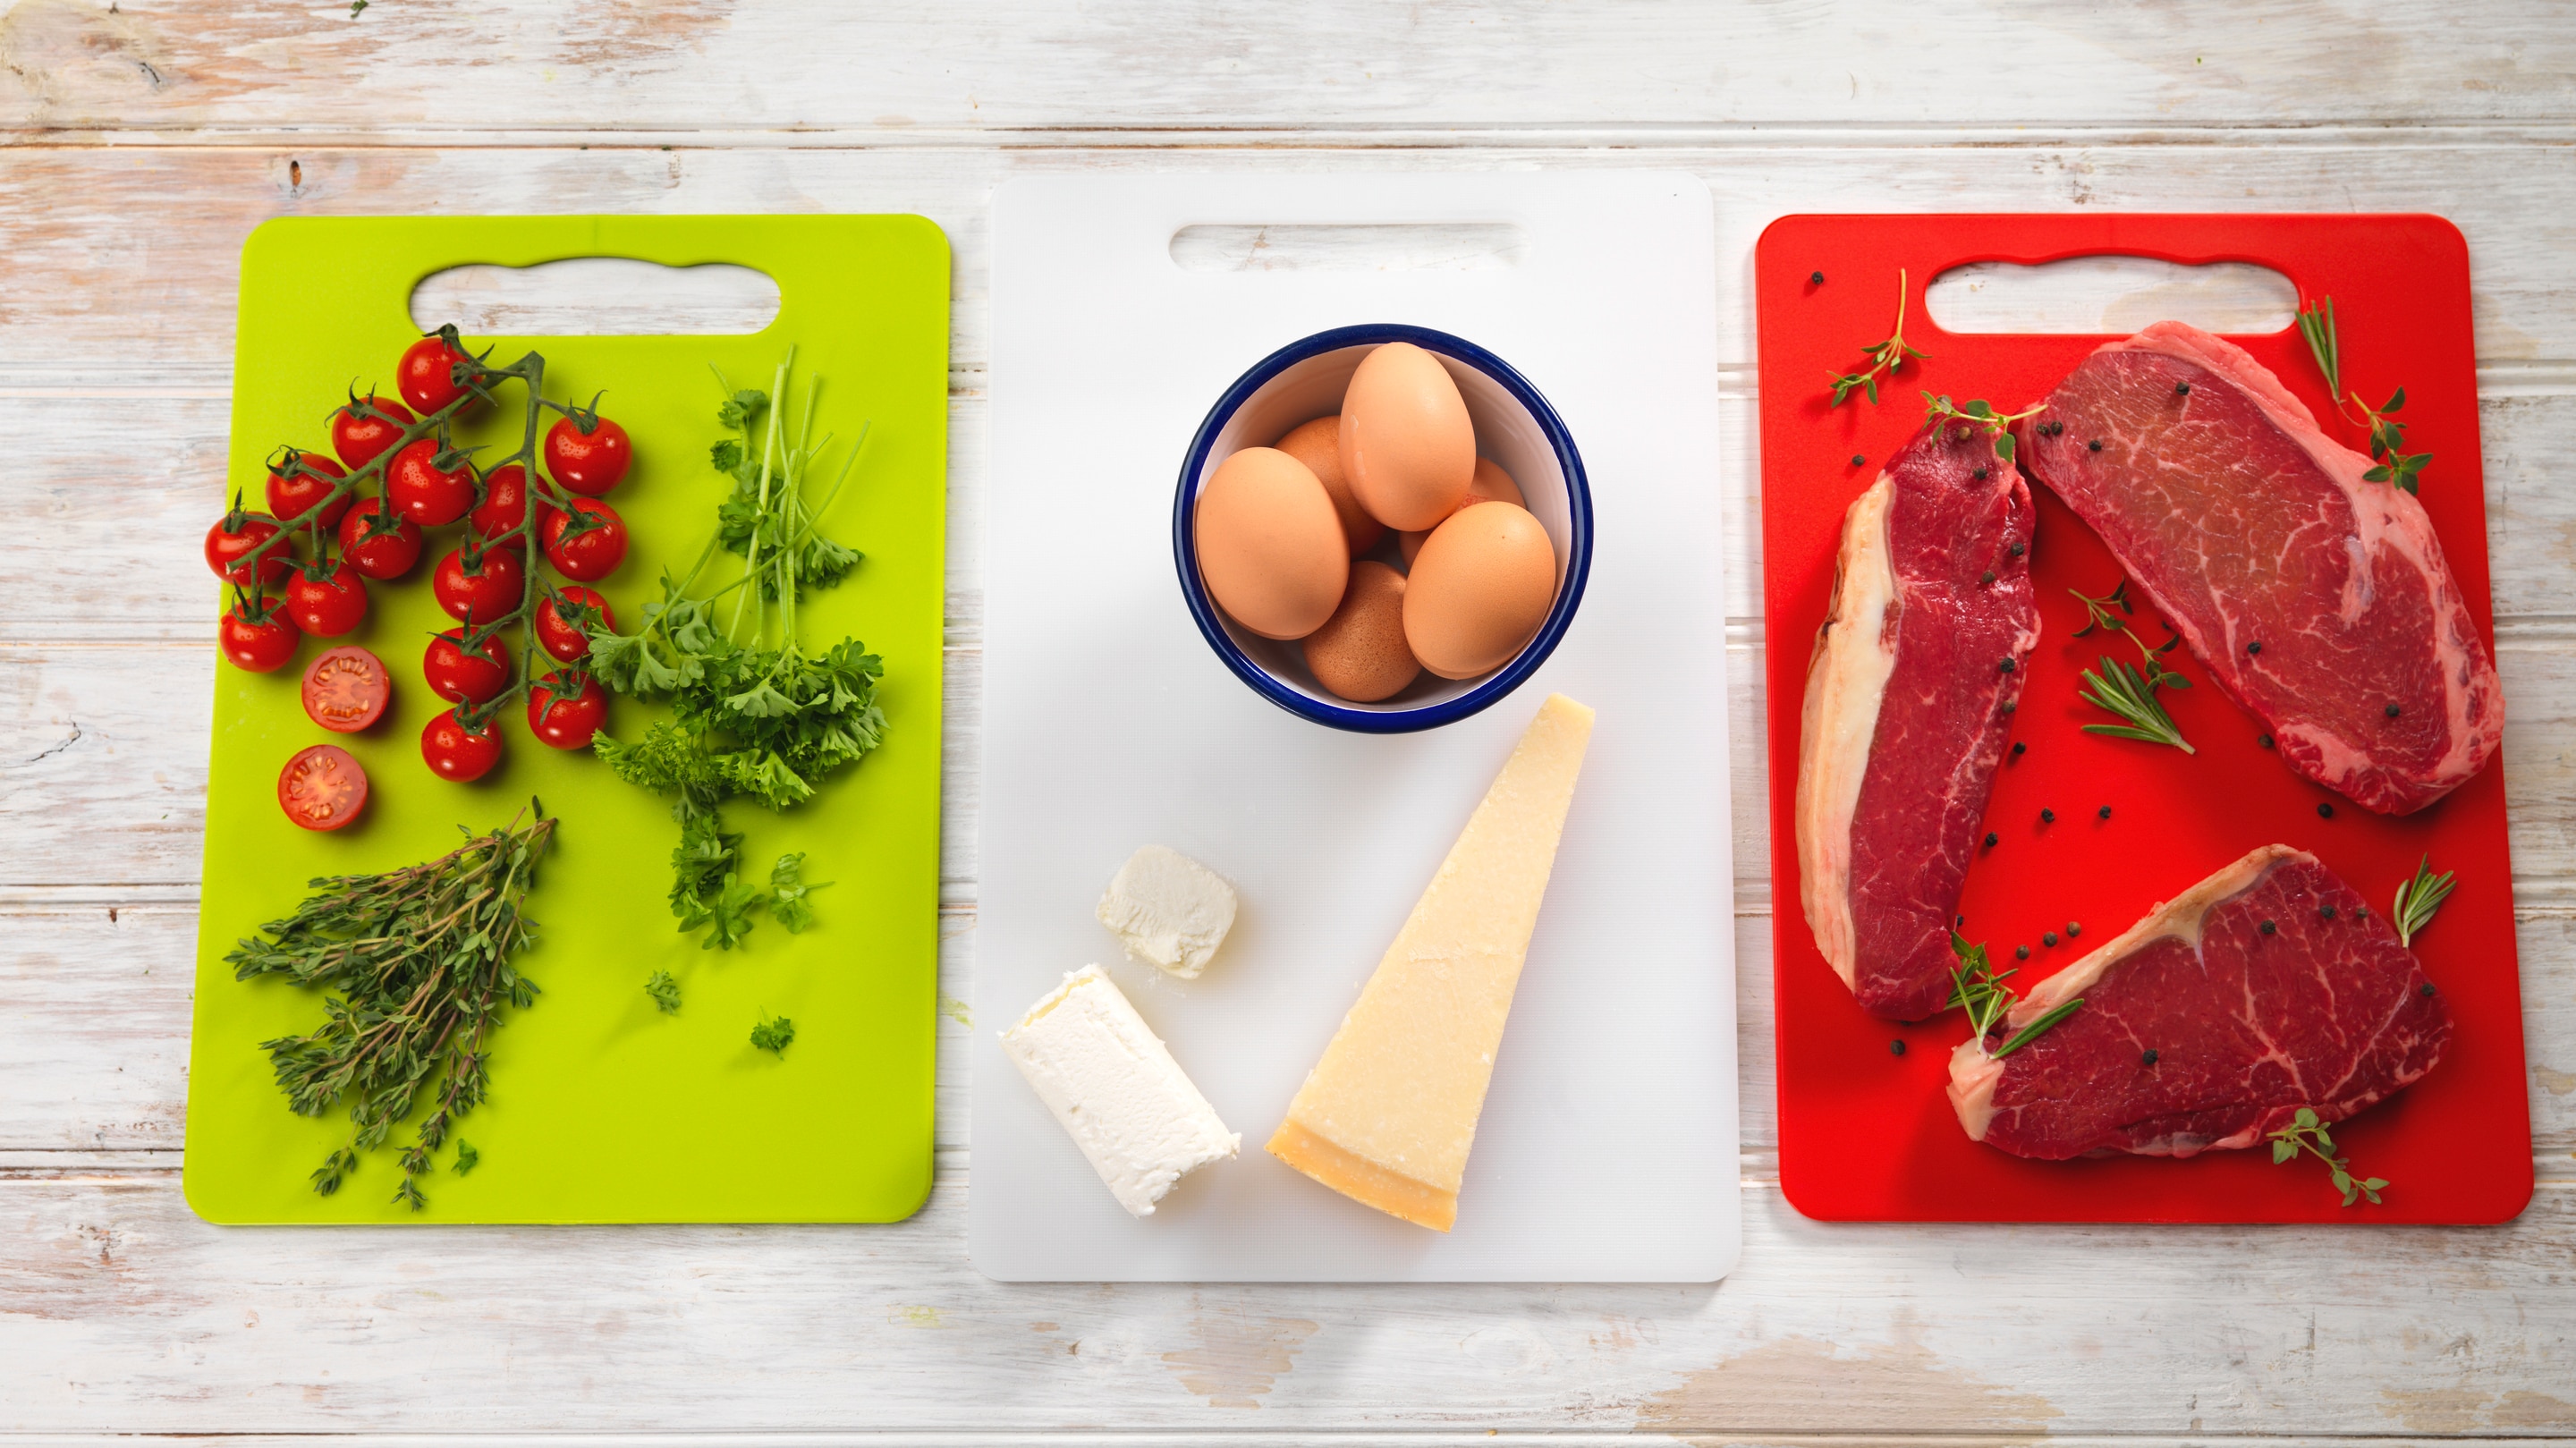 Tomatoes, parsely & rosemary on green chopping board, eggs & cheese on white chopping board and steak on red chopping board